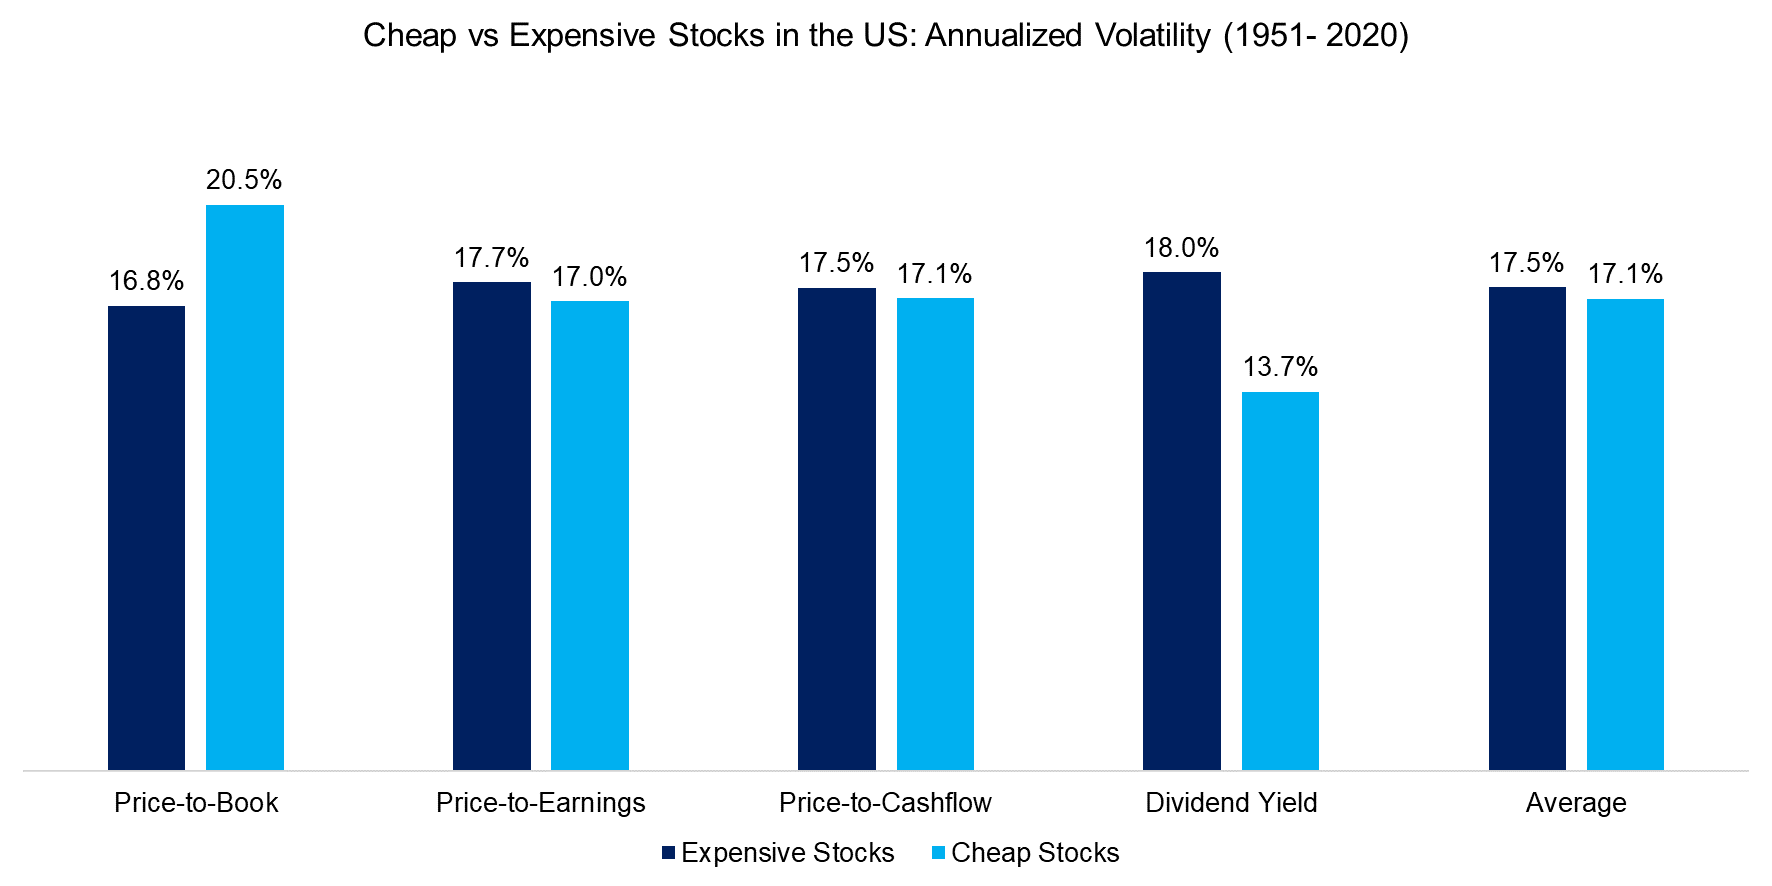 Cheap vs Expensive Stocks in the US Annualized Volatility (1951- 2020)